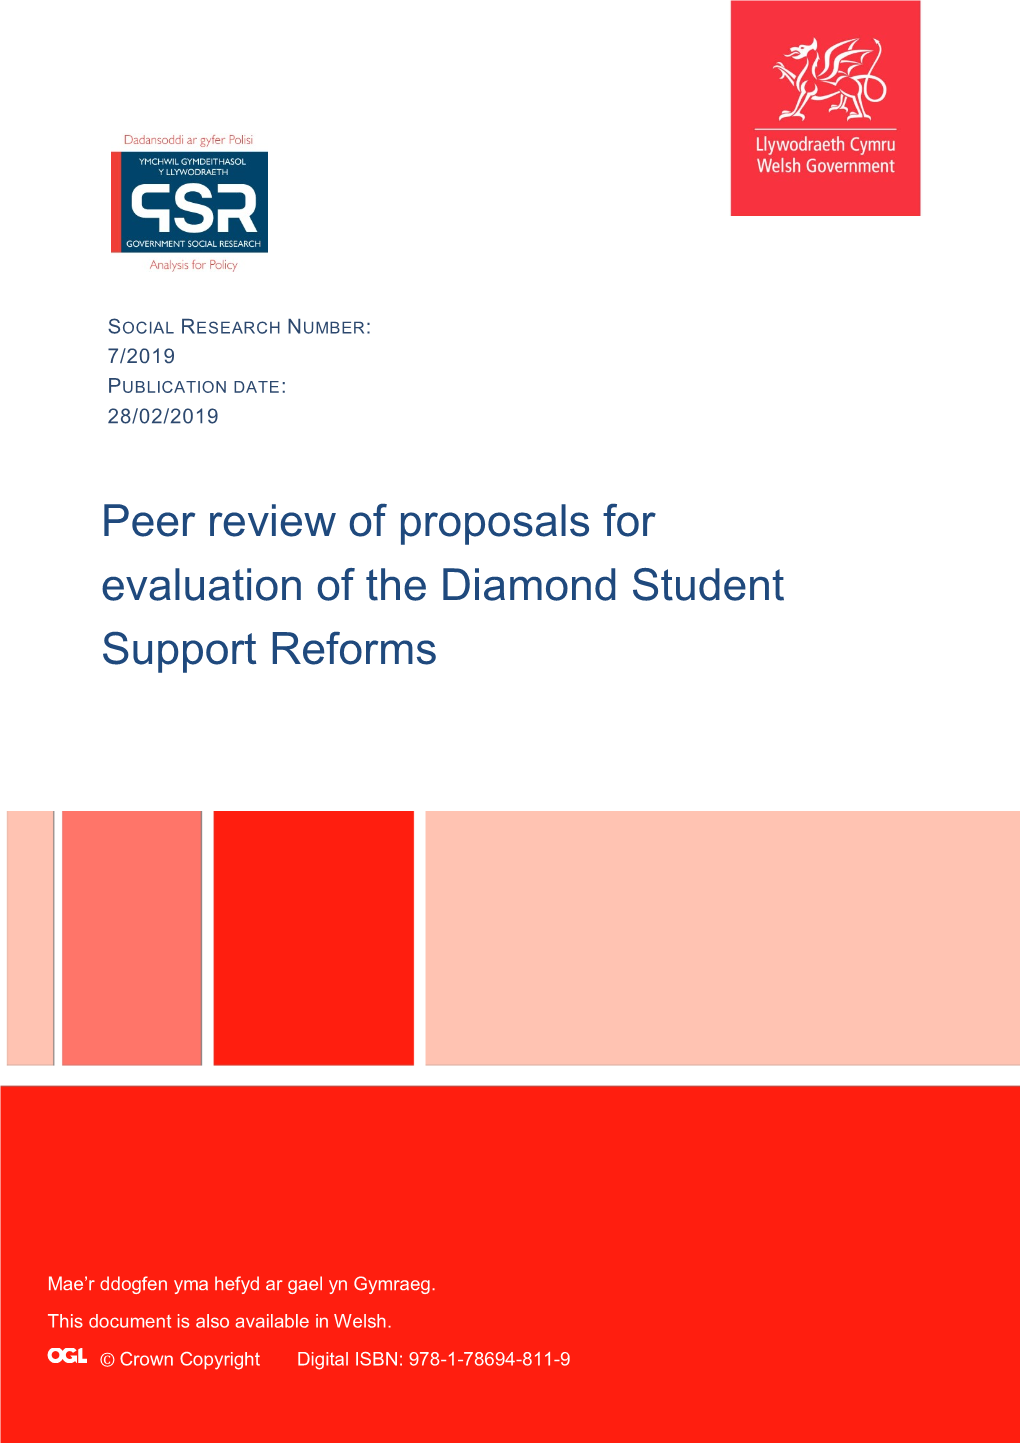 Peer Review of Proposals for Evaluation of the Diamond Student Support Reforms